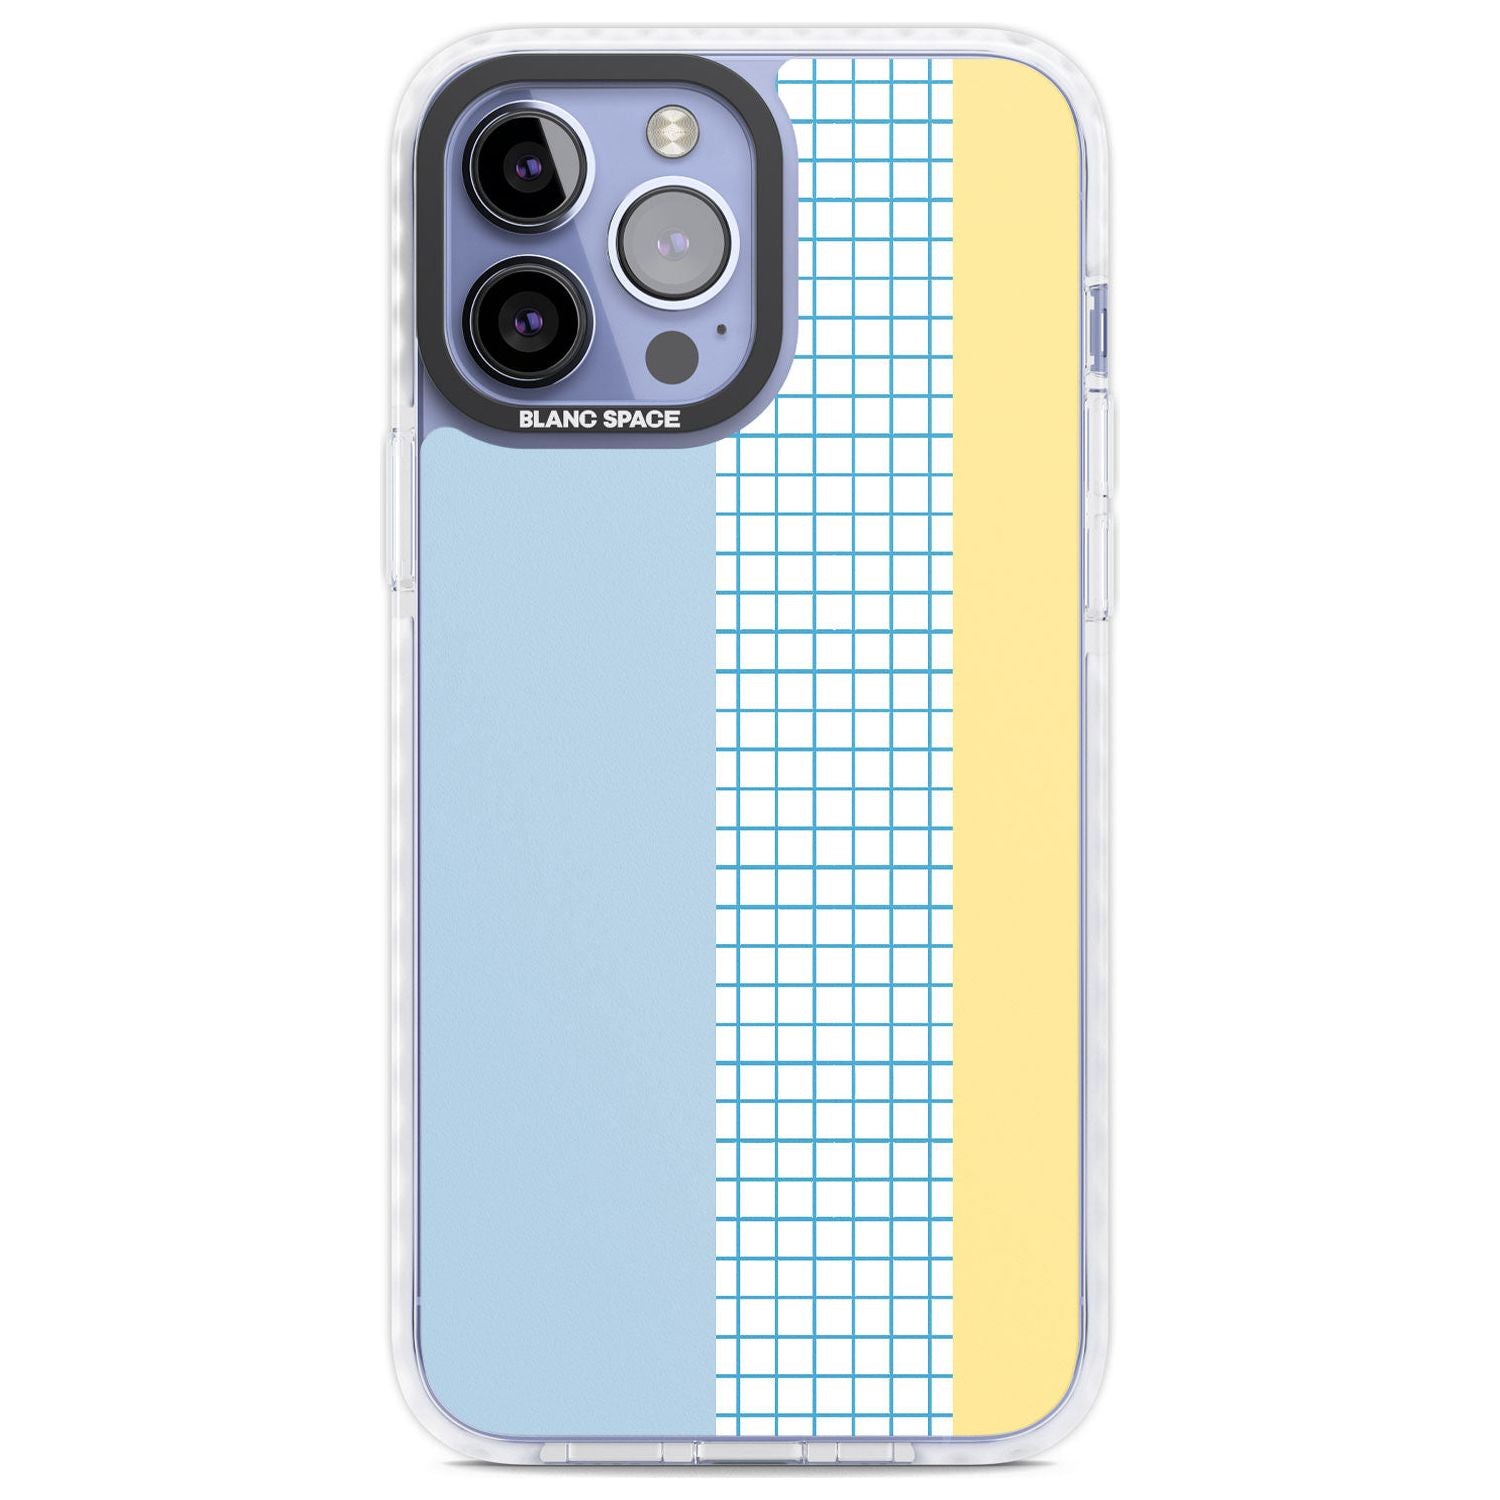 Abstract Grid Blue & Yellow Phone Case iPhone 13 Pro Max / Impact Case,iPhone 14 Pro Max / Impact Case Blanc Space